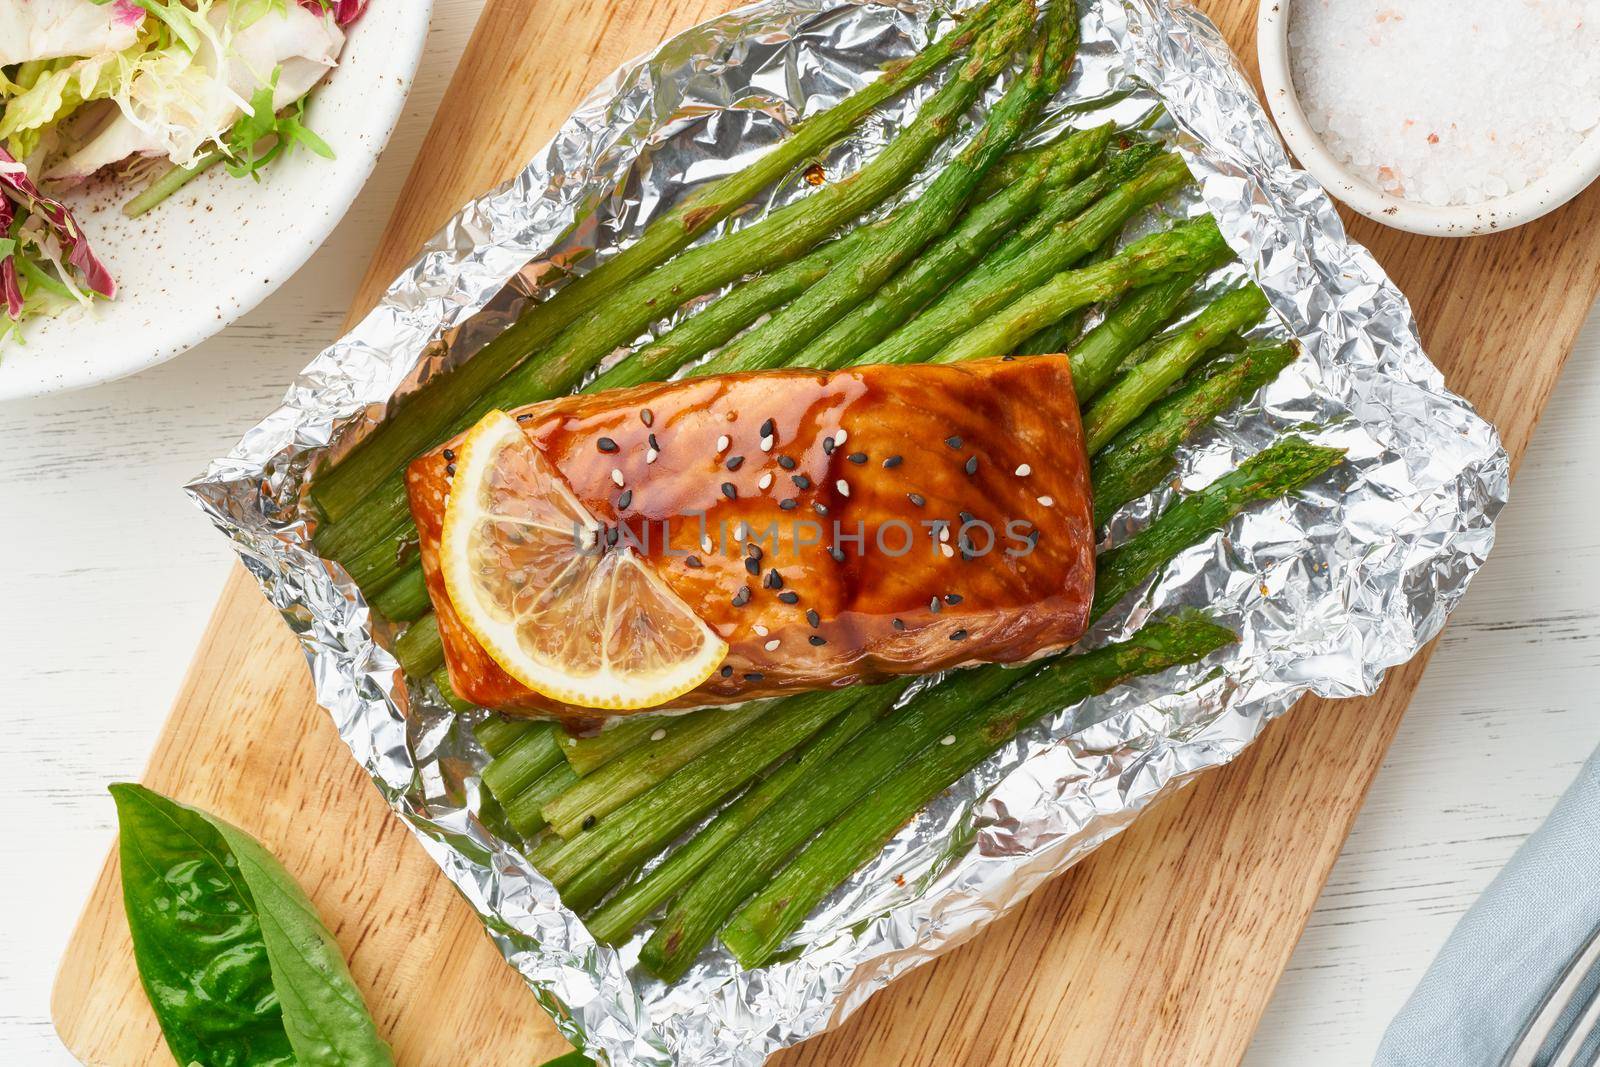 Foil pack dinner with red fish. Fillet of salmon with asparagus. Oven-baked hot dinner by NataBene